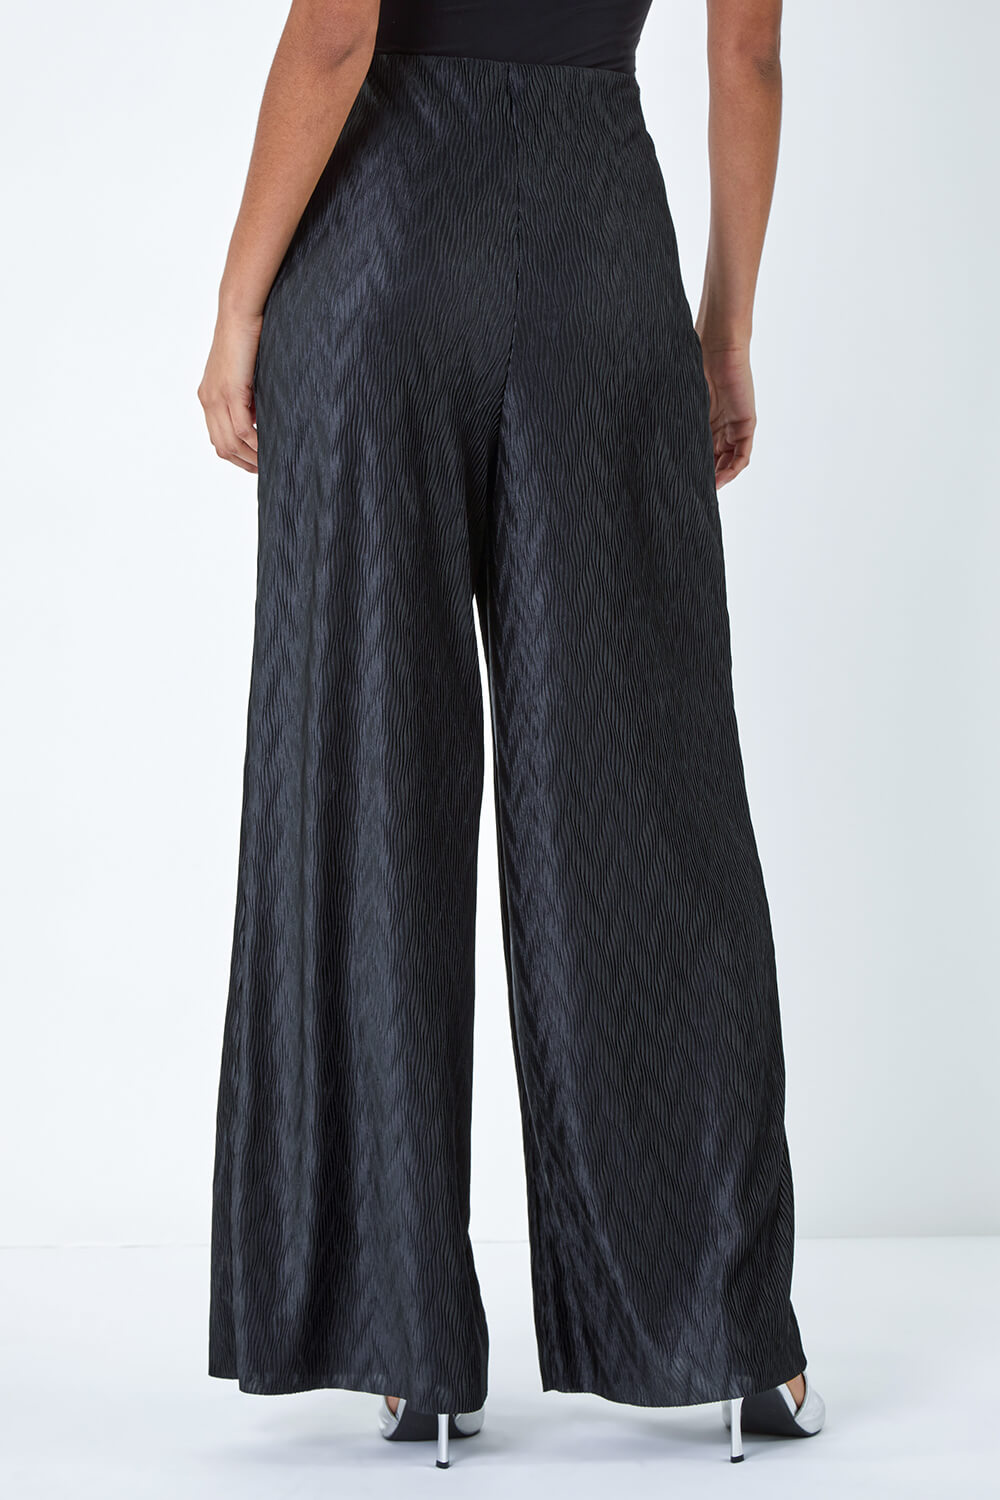 Black Plisse Wave Wide Leg Stretch Trousers, Image 3 of 5